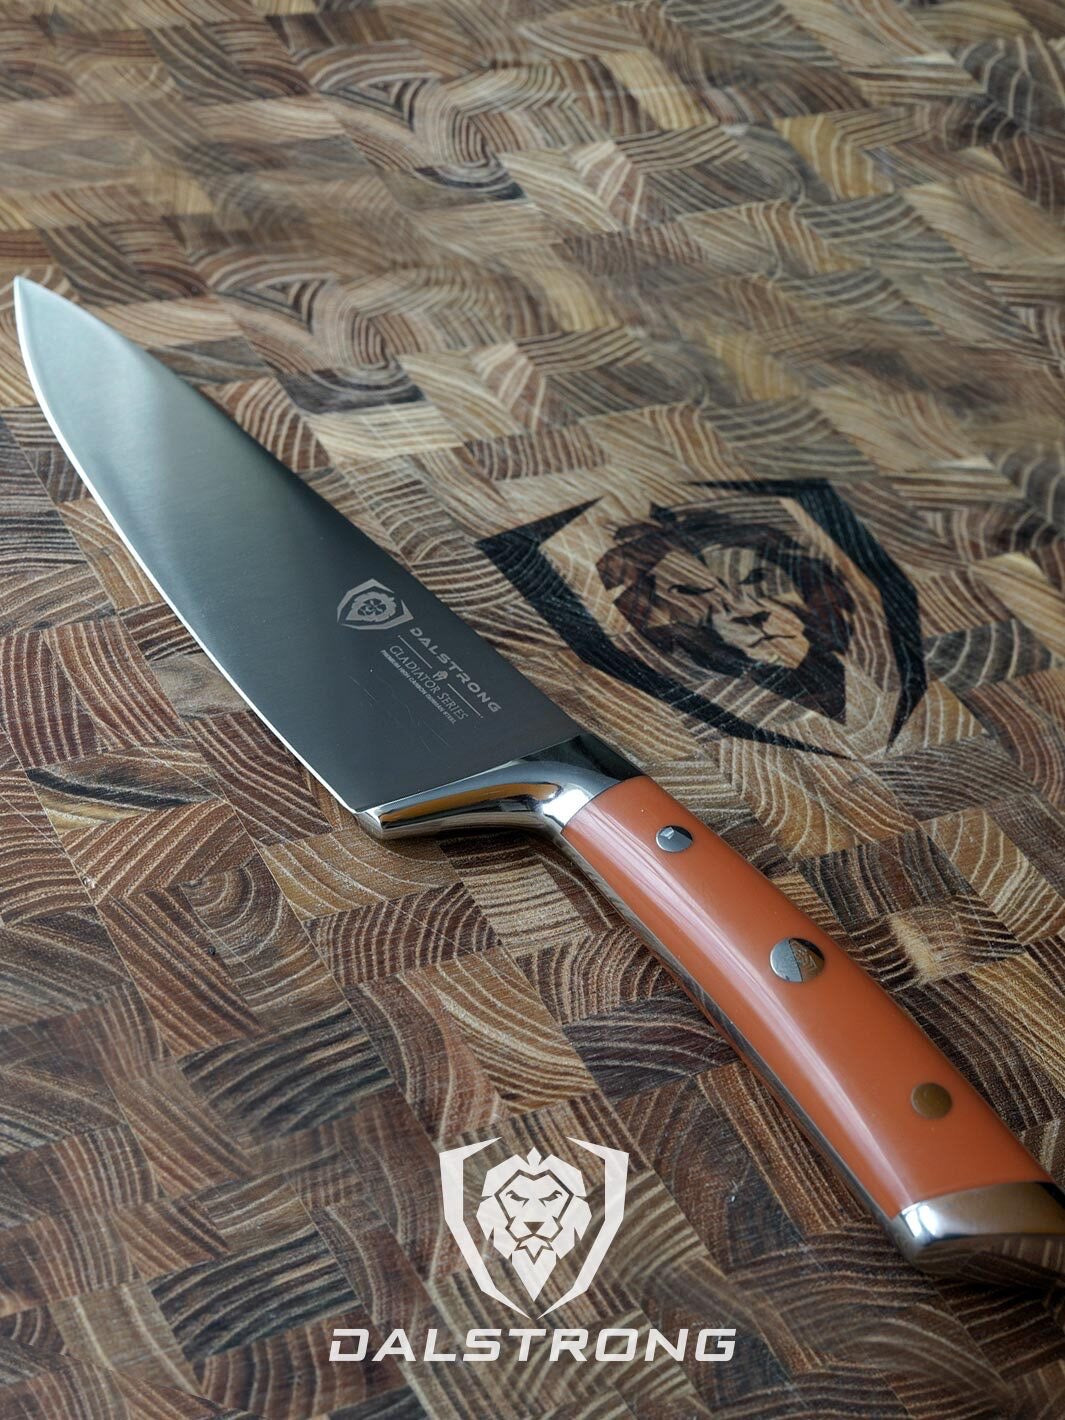 Dalstrong Chef Knife - 8 inch - Gladiator Series - Forged High Carbon German Steel - Orange ABS Handle - Full Tang Kitchen Knife - Cooking Knife - W